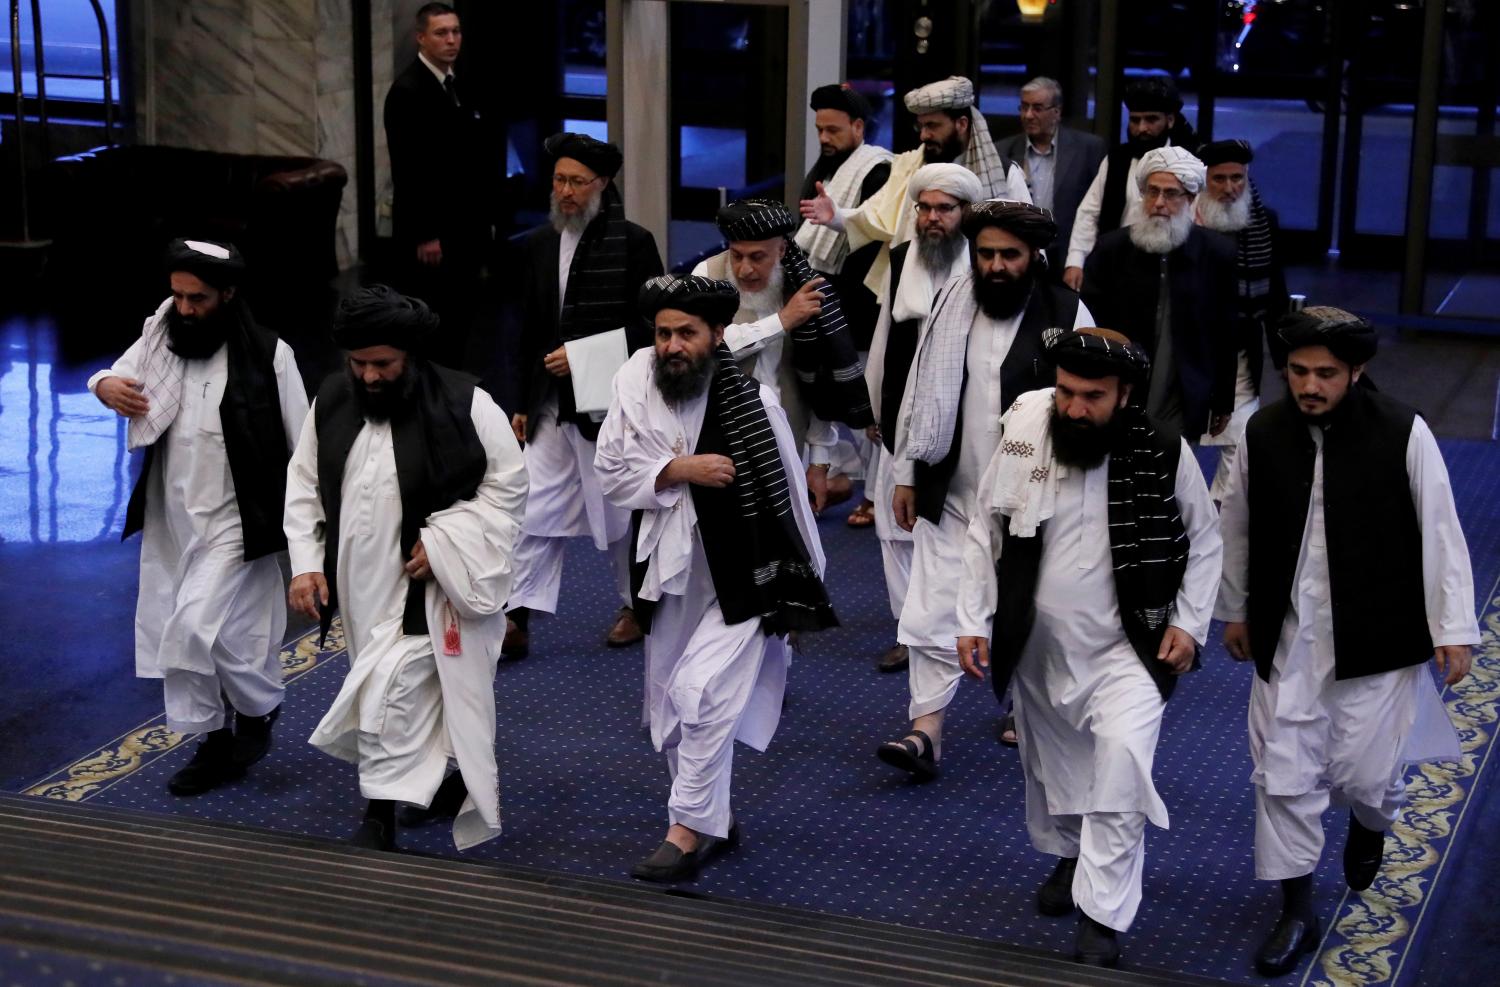 Taliban officials led by the movement's chief negotiator Mullah Abdul Ghani Baradar (C, front) attend peace talks between senior Afghan politicians and Taliban negotiators in Moscow, Russia May 29, 2019. REUTERS/Evgenia Novozhenina